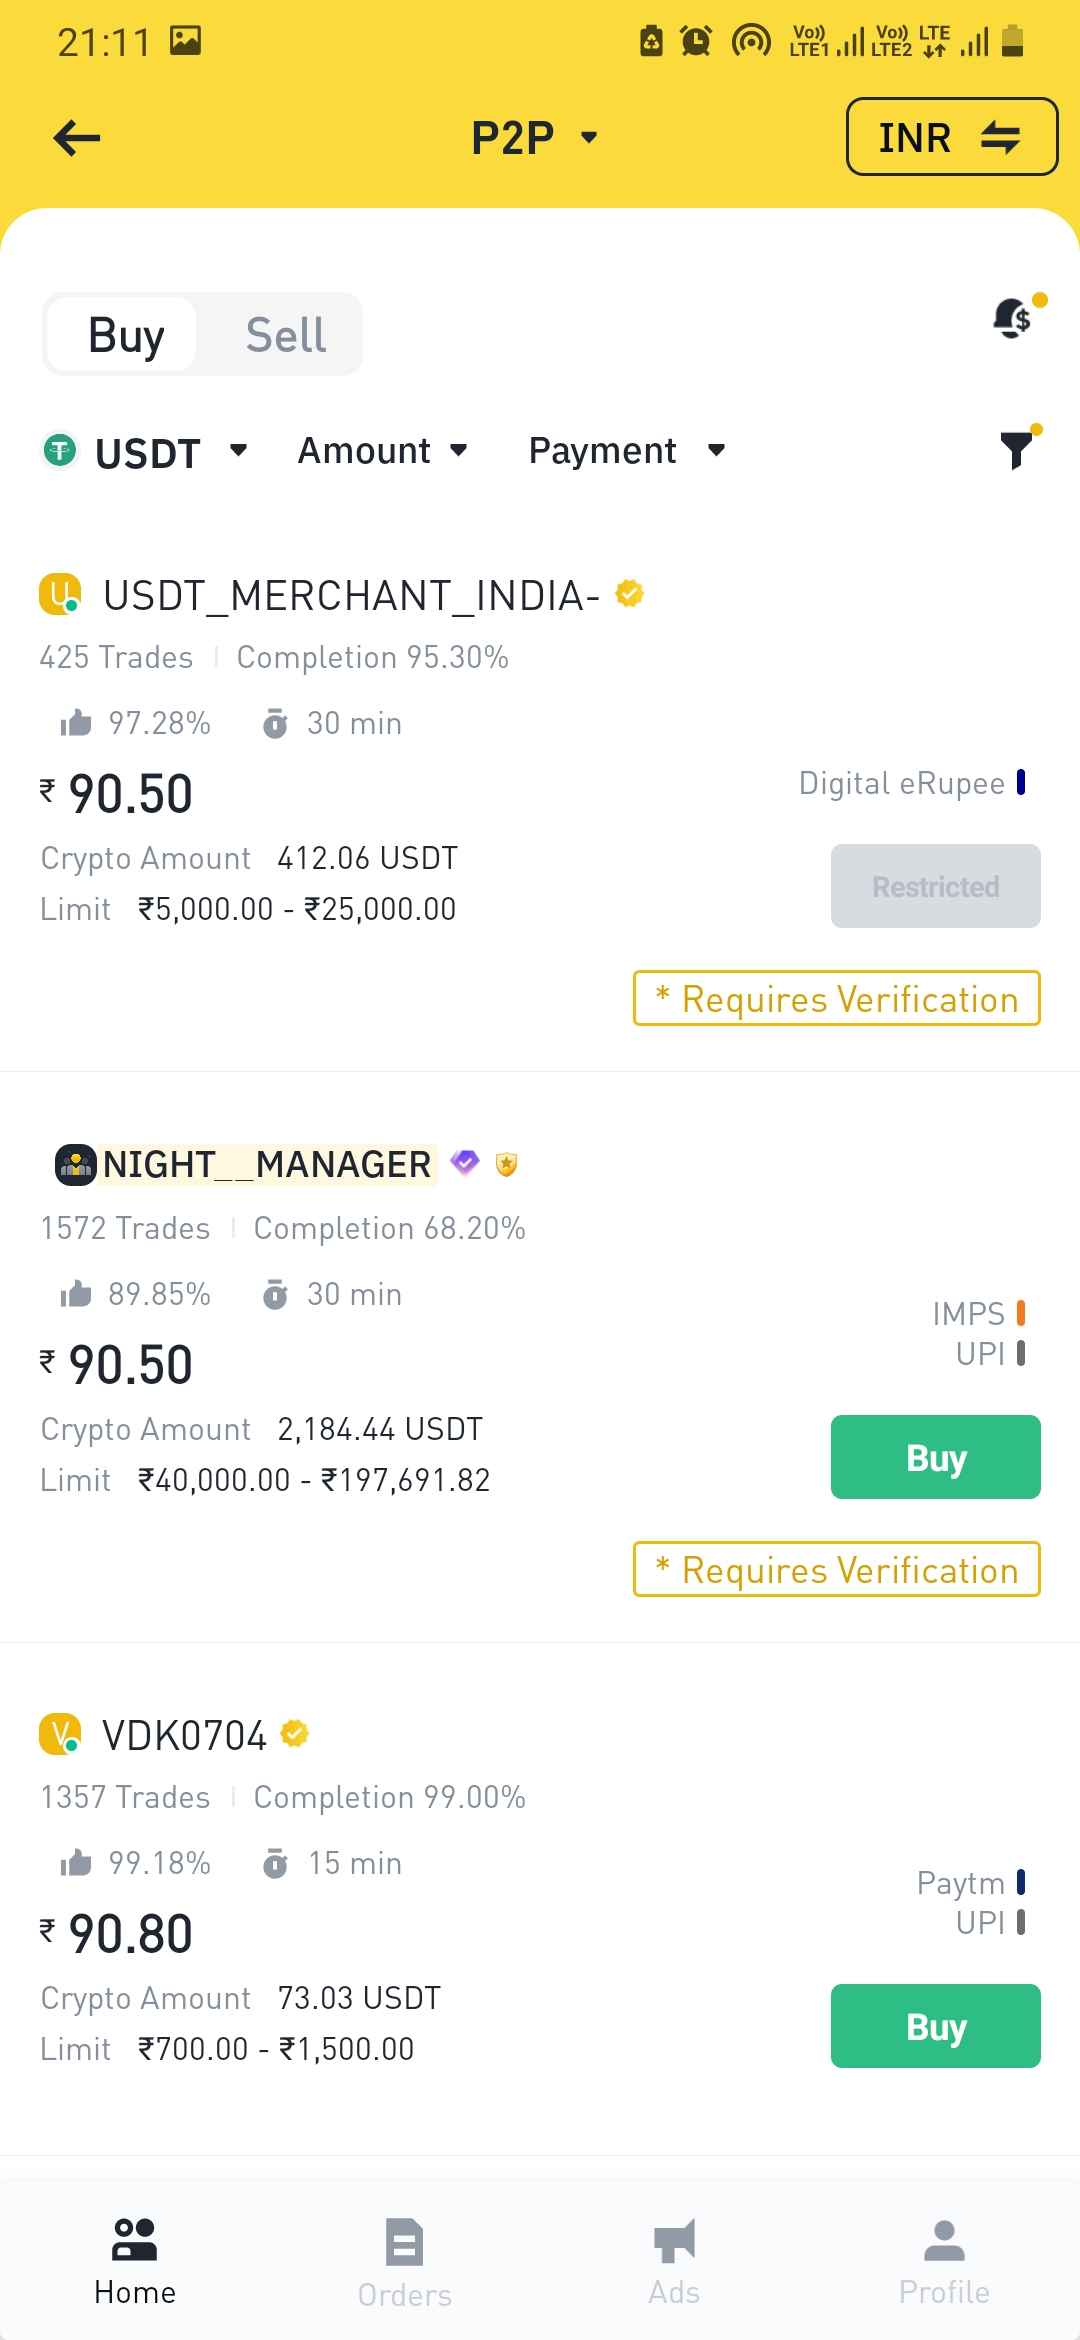 How to buy Portal Coin Token in India?